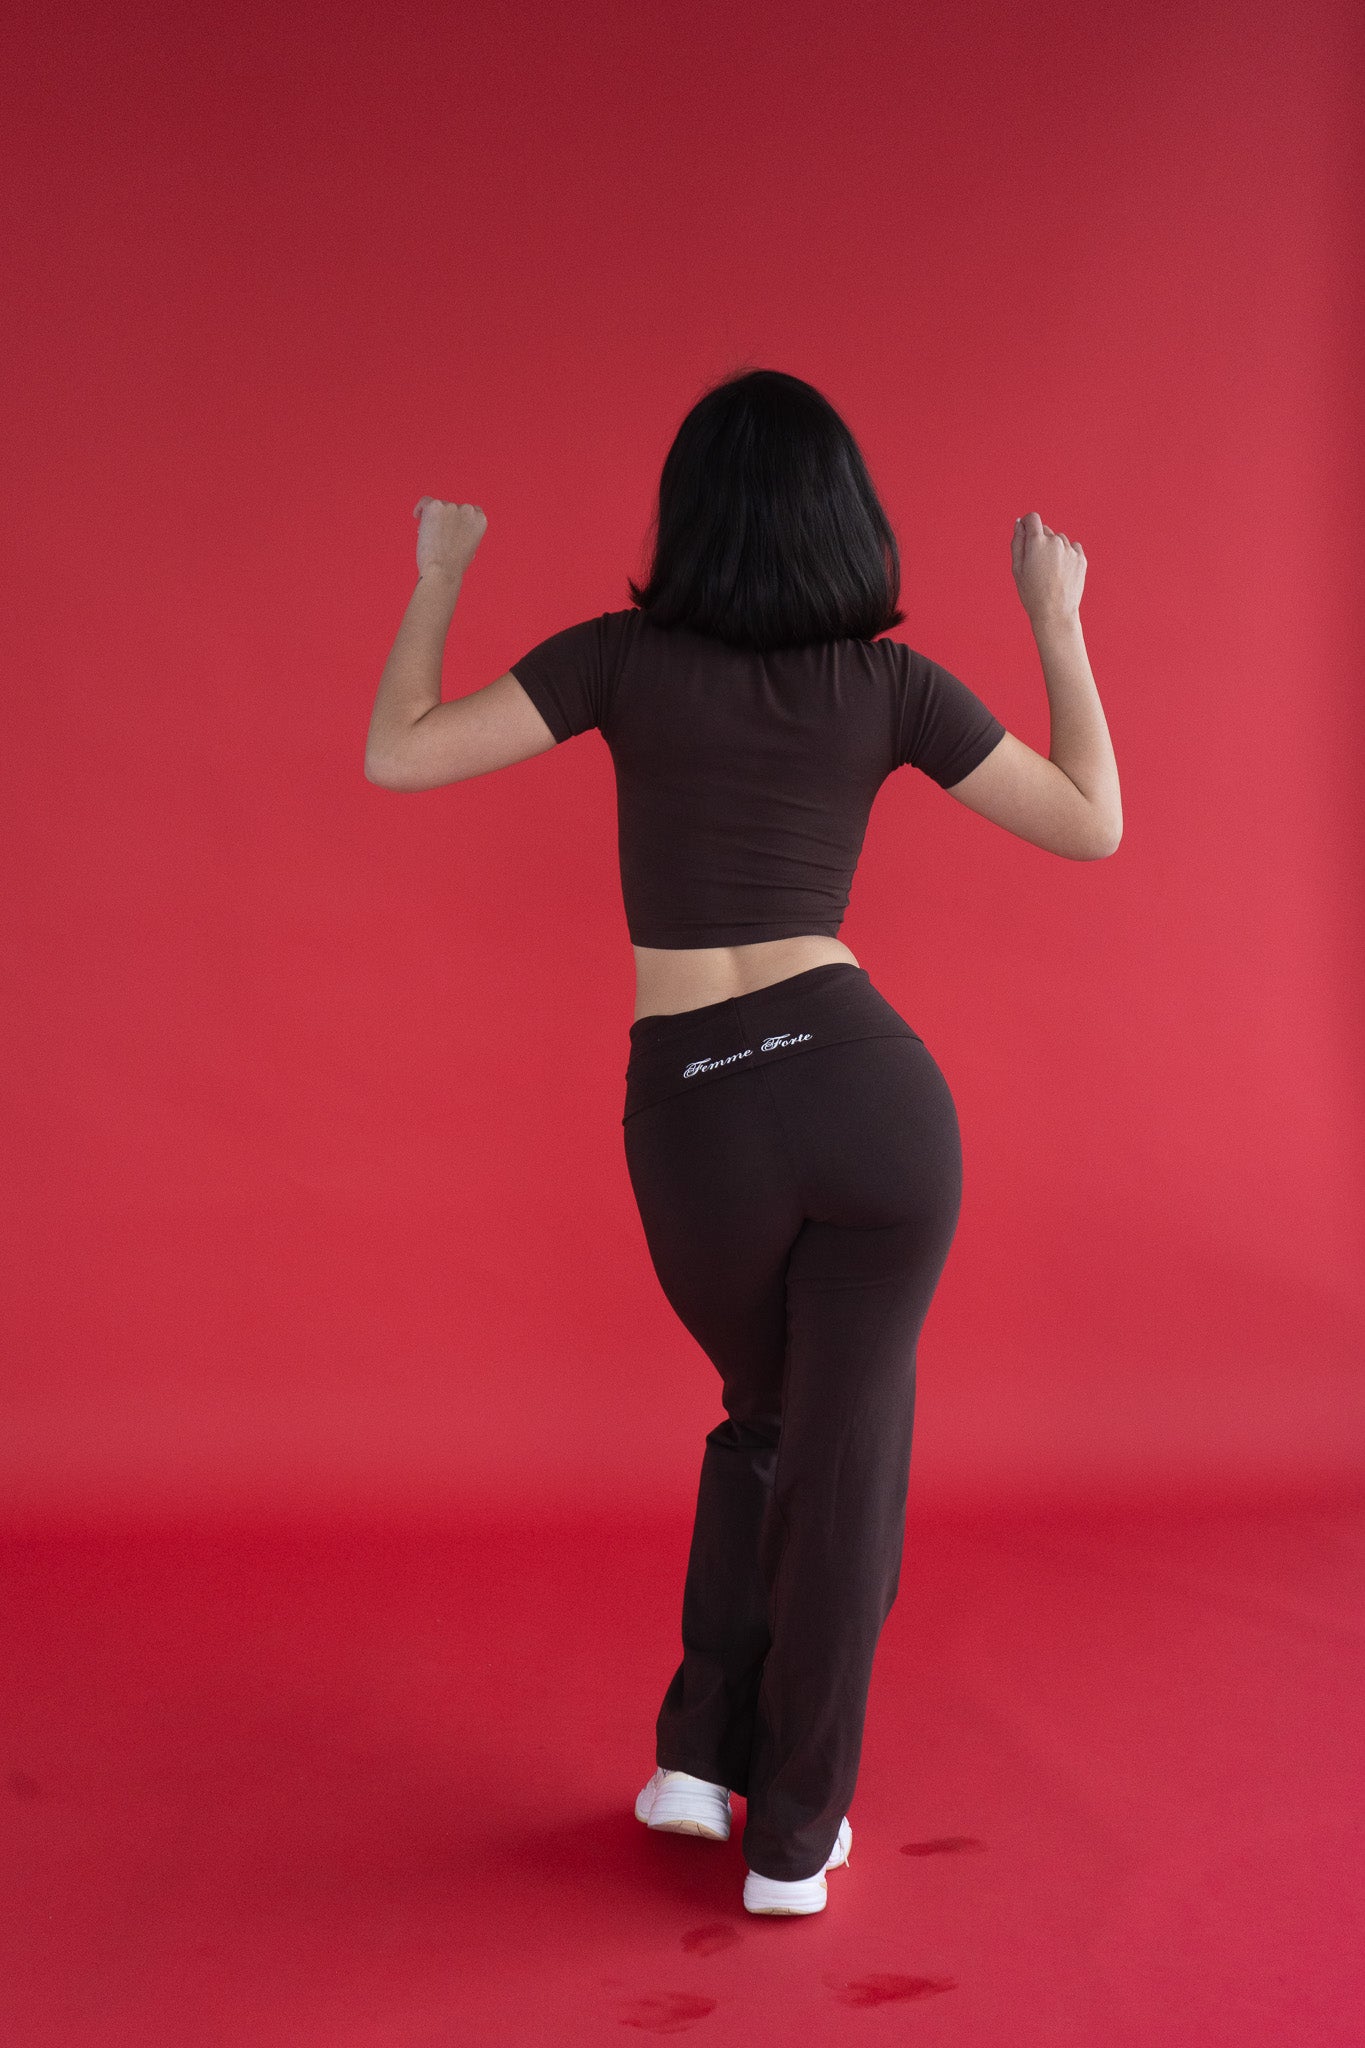 Fold Over Yoga Pants in Chocolate